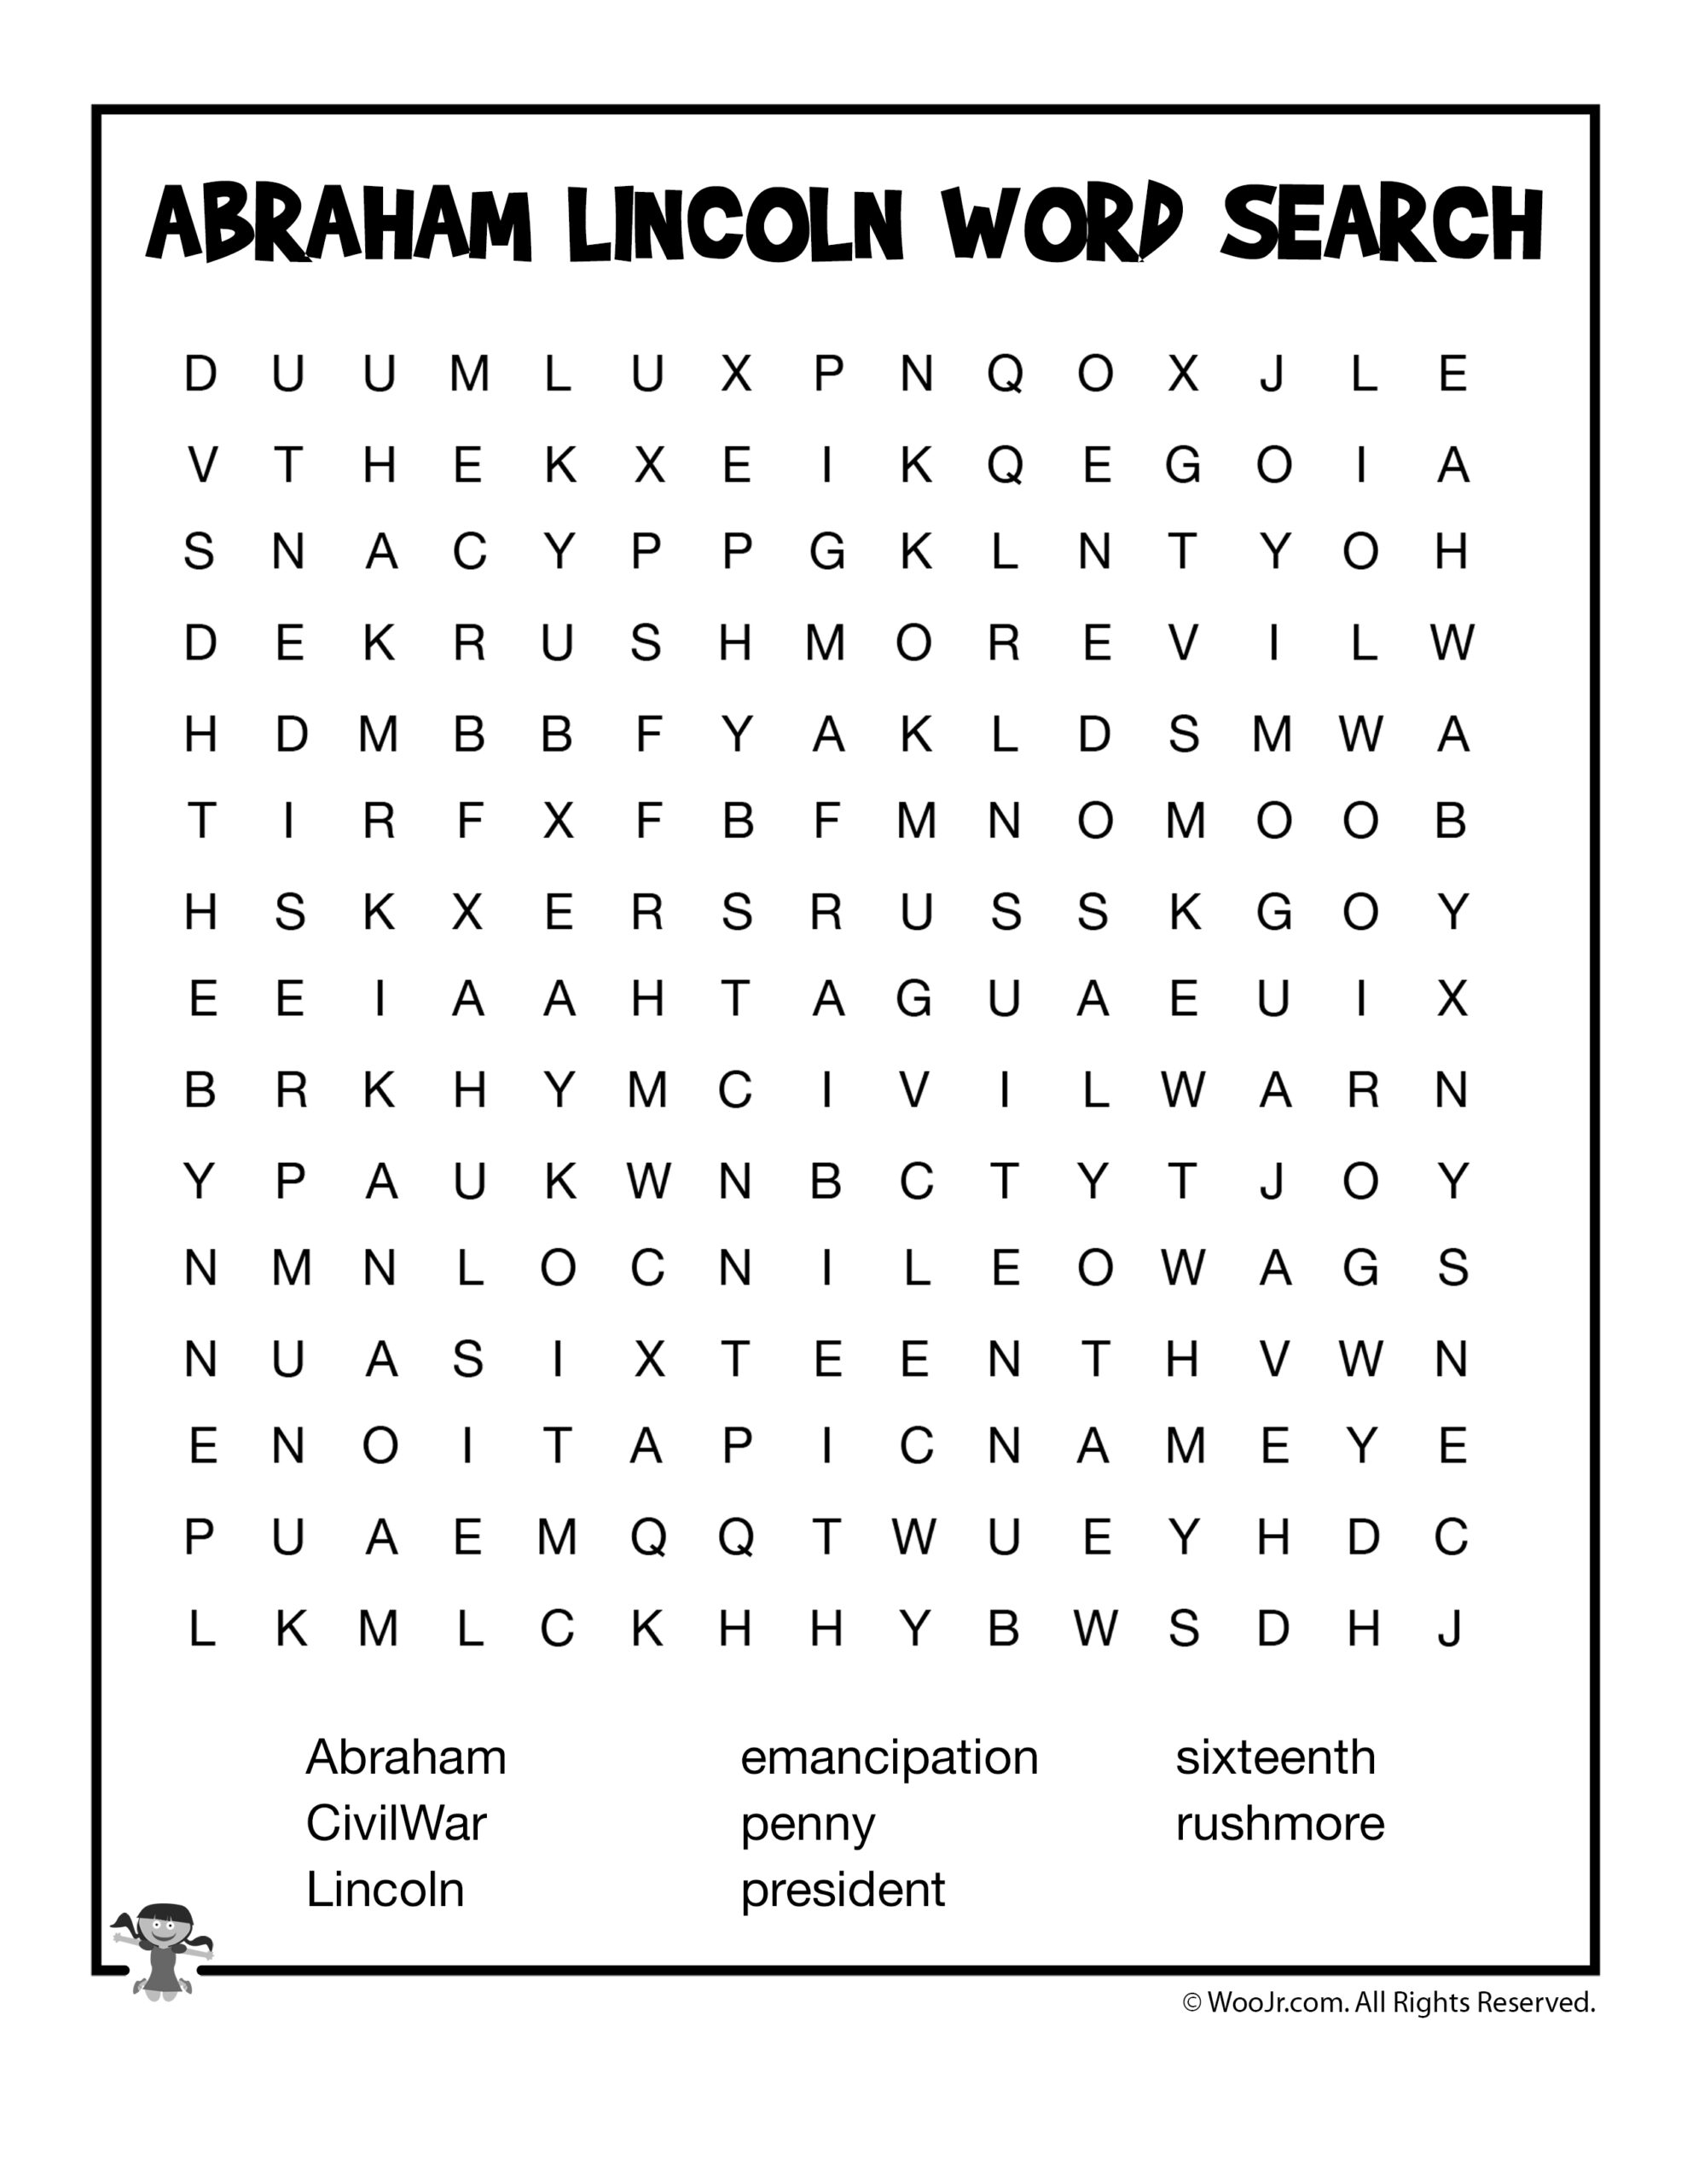 Abraham Lincoln Word Search Woo Jr Kids Activities Children s Publishing